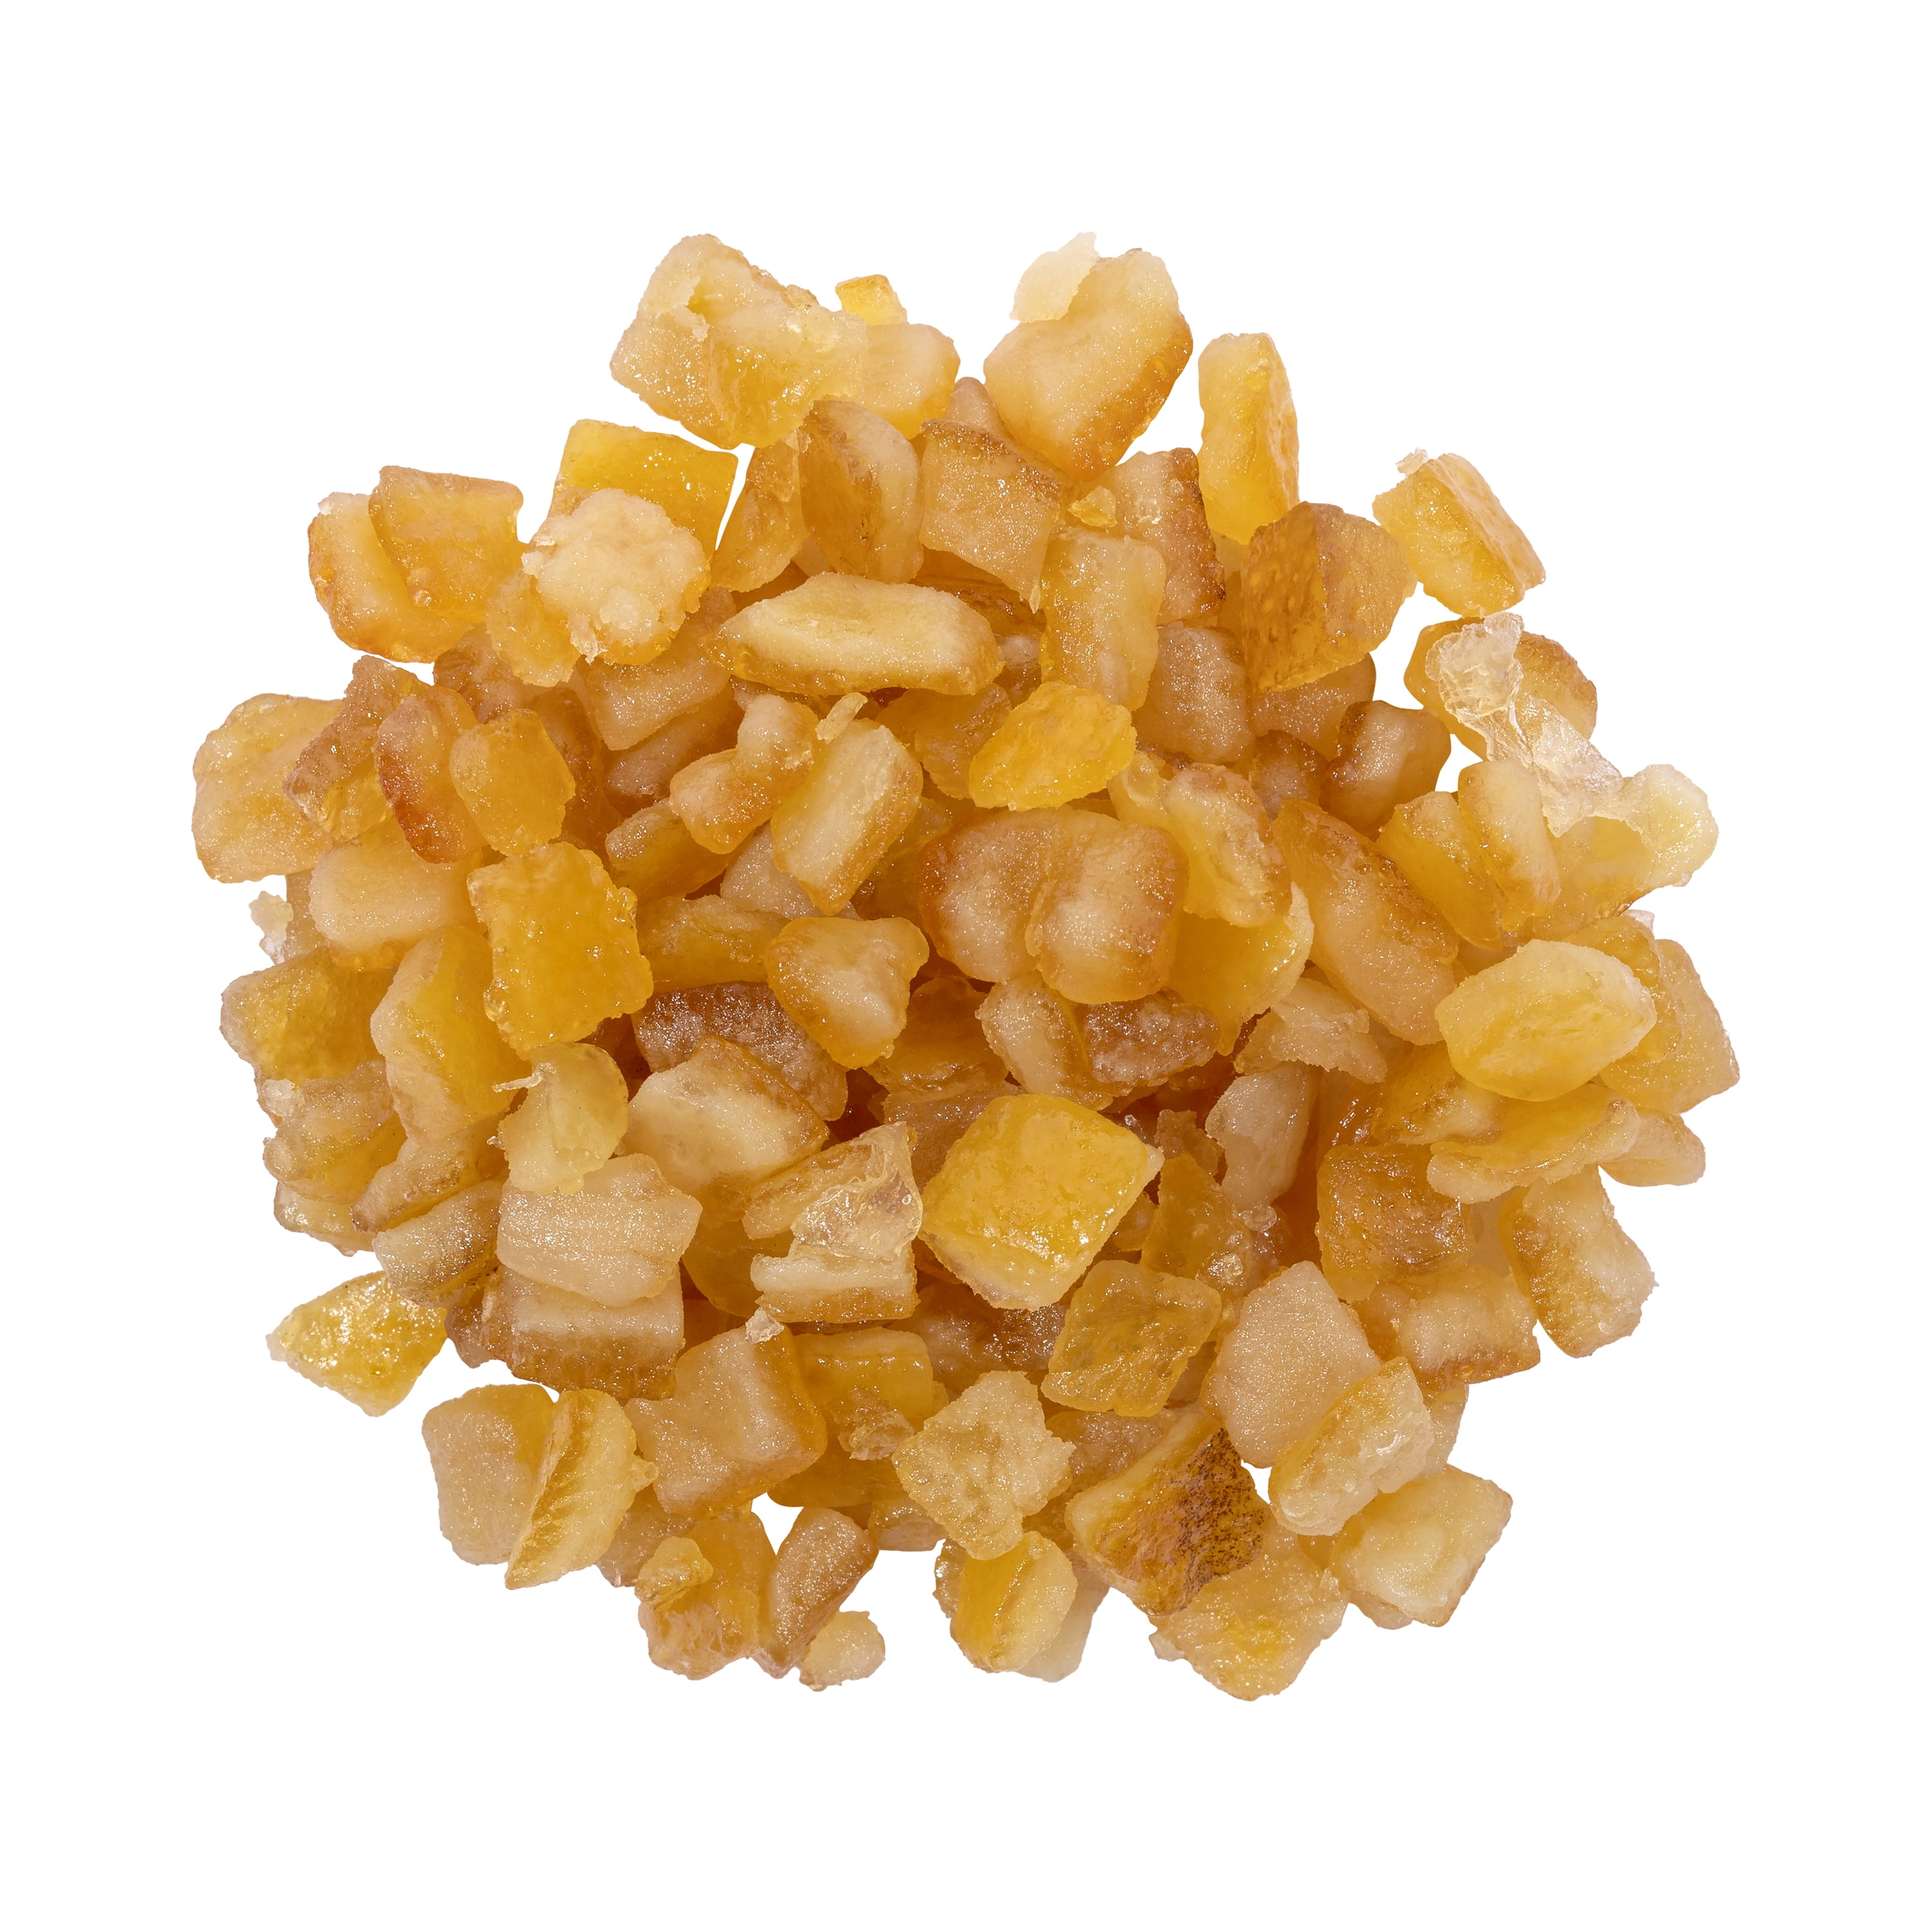 Candied Mixed Peel 10oz